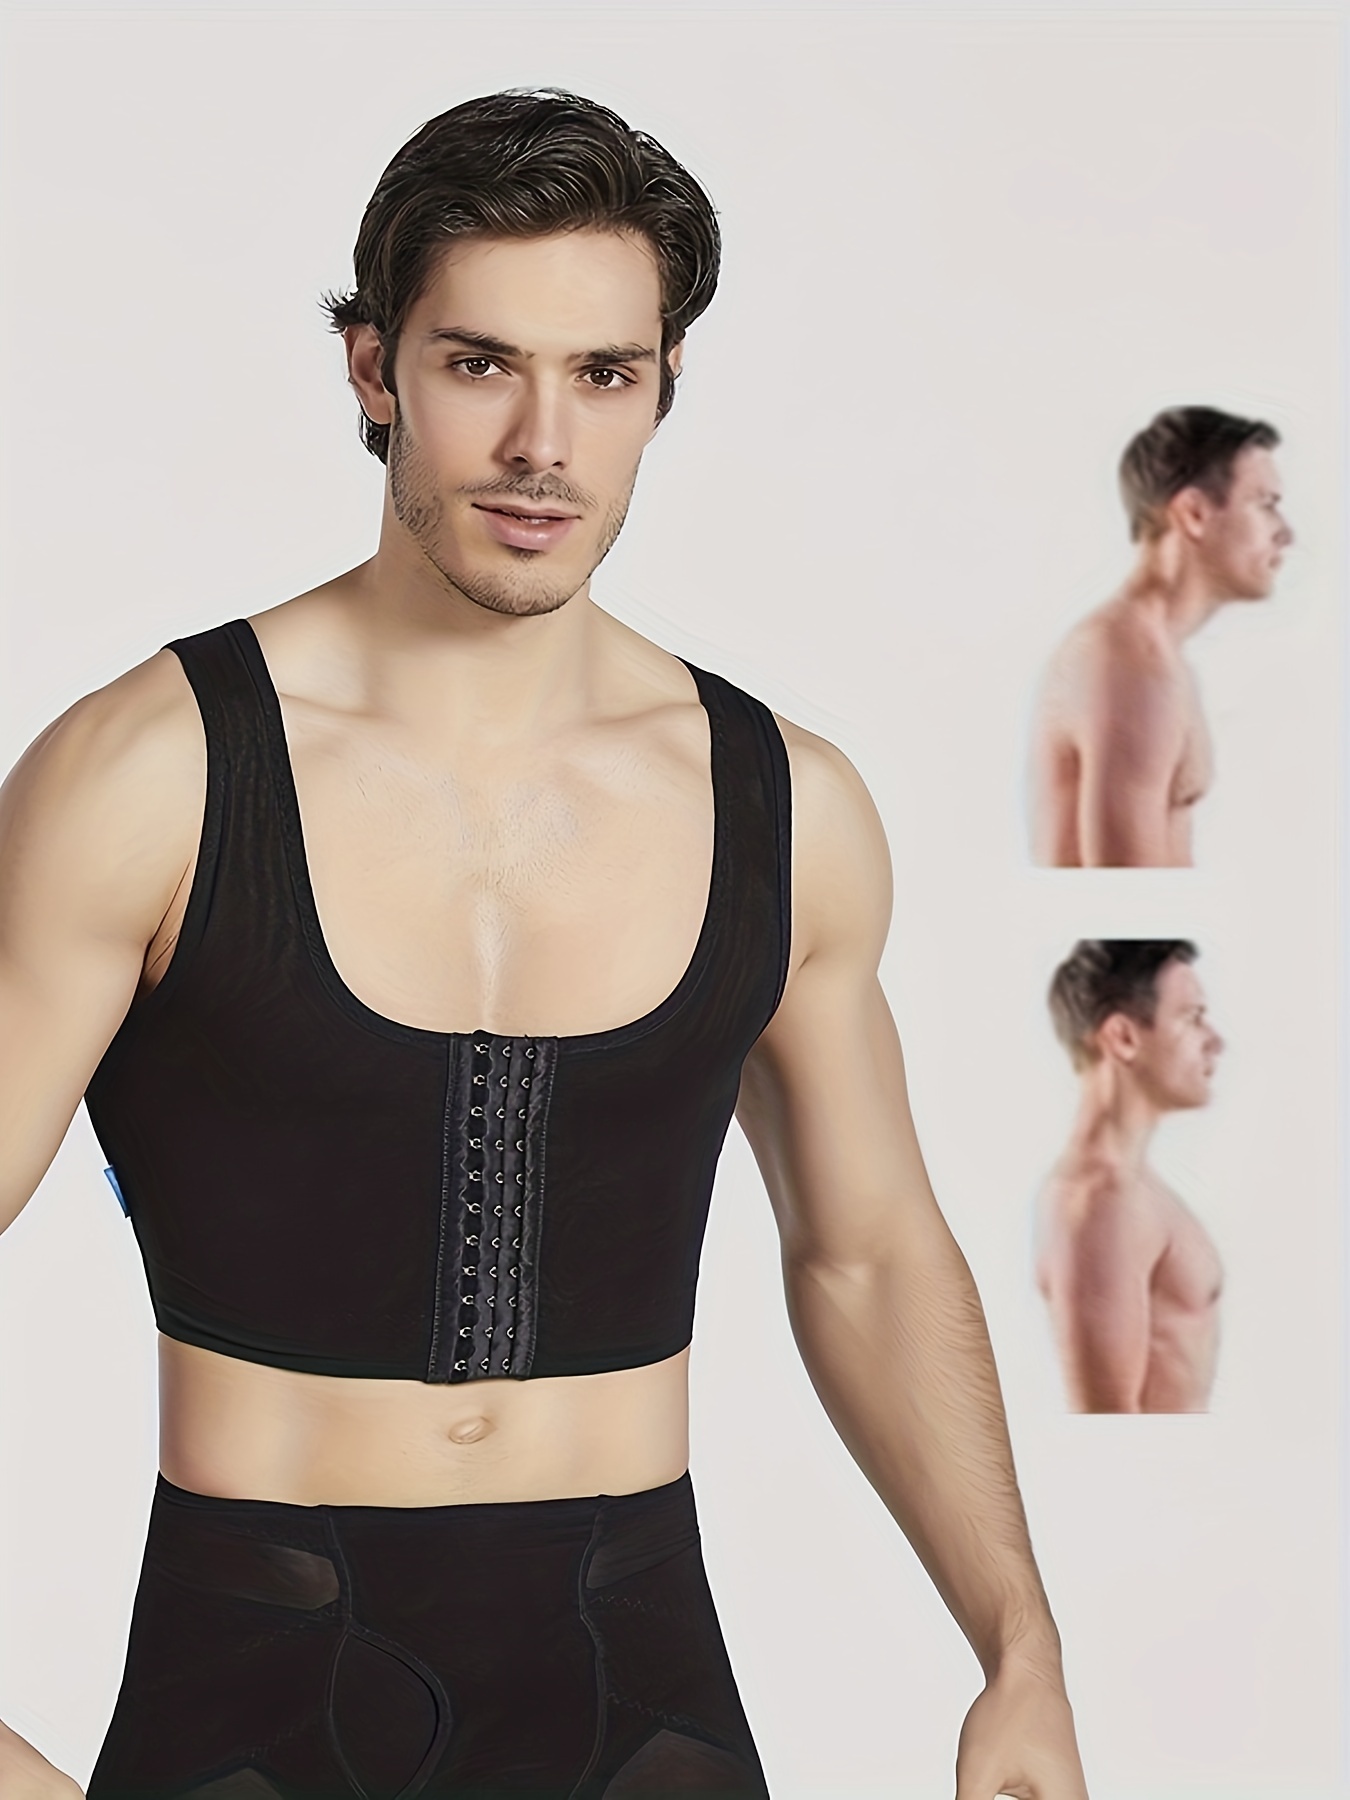 Rear and Hip Padded Brief. Men Compression Shirts, Girdles, Chest Binders,  Hernia Garments